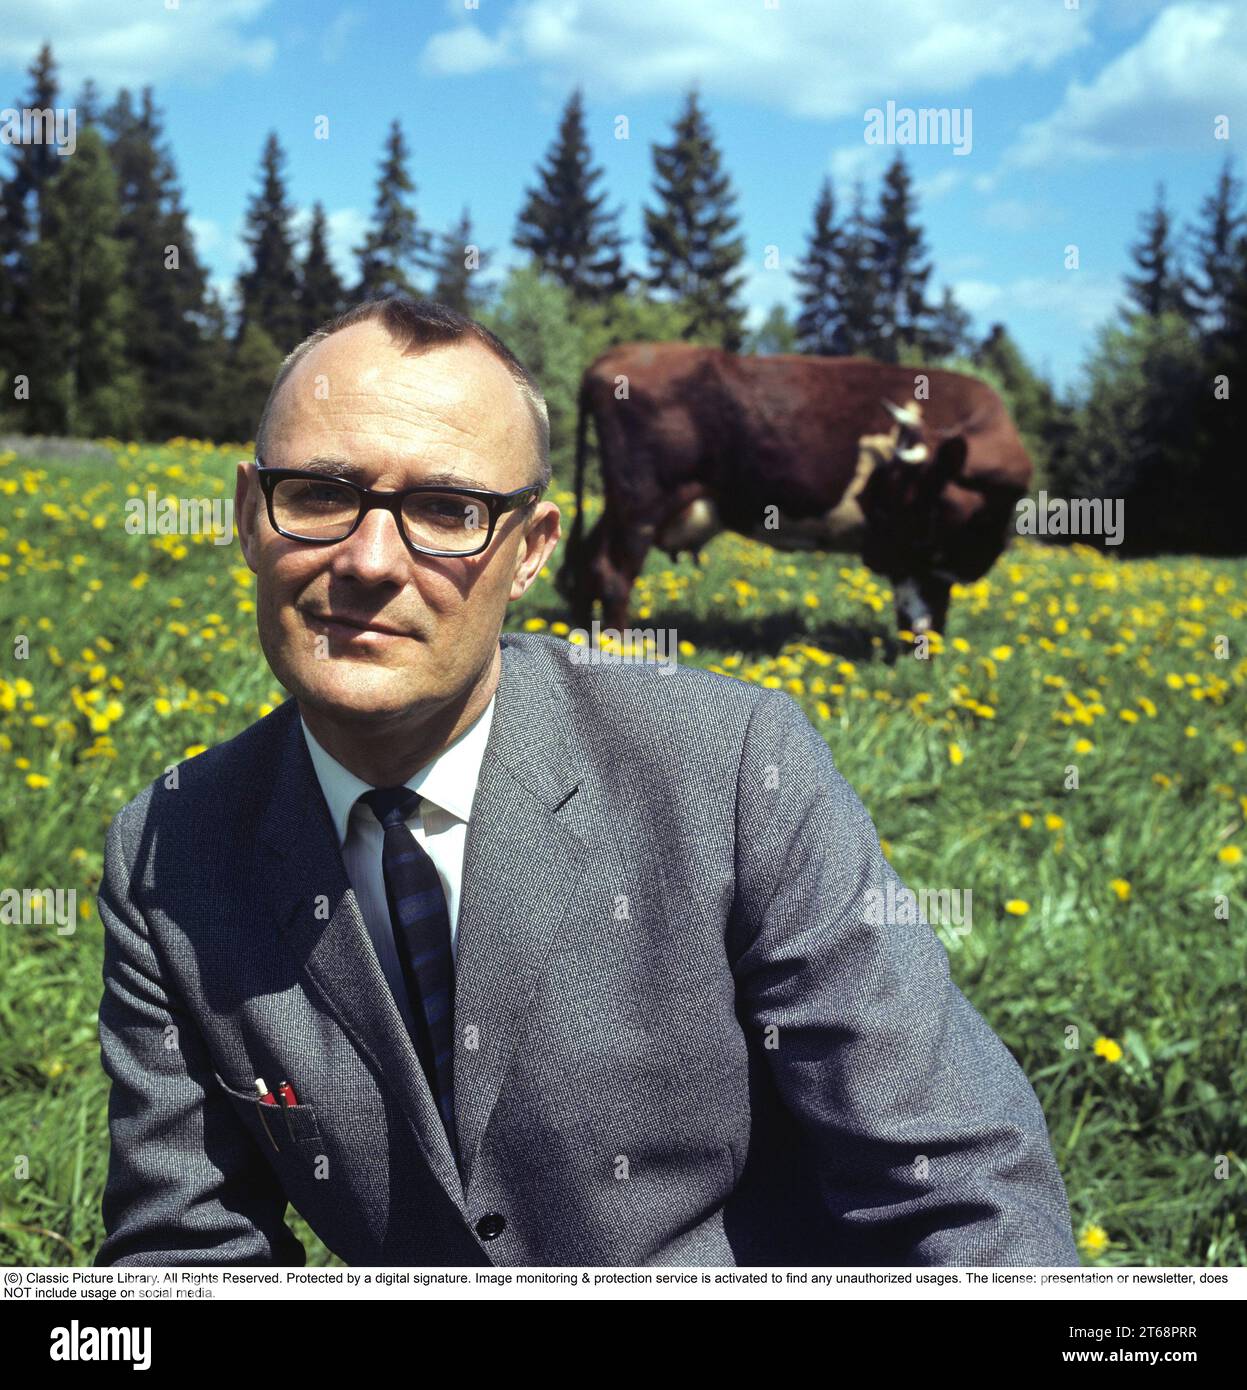 Feodor Ingvar Kamprad. 30 March 1926 – 27 January 2018) was a Swedish billionaire business magnate best known for founding IKEA, a multinational retail company specialising in furniture. Pictured outside his home town of Älmhult Småland Sweden 1968. Roland Palm ref 2-11-8 Stock Photo